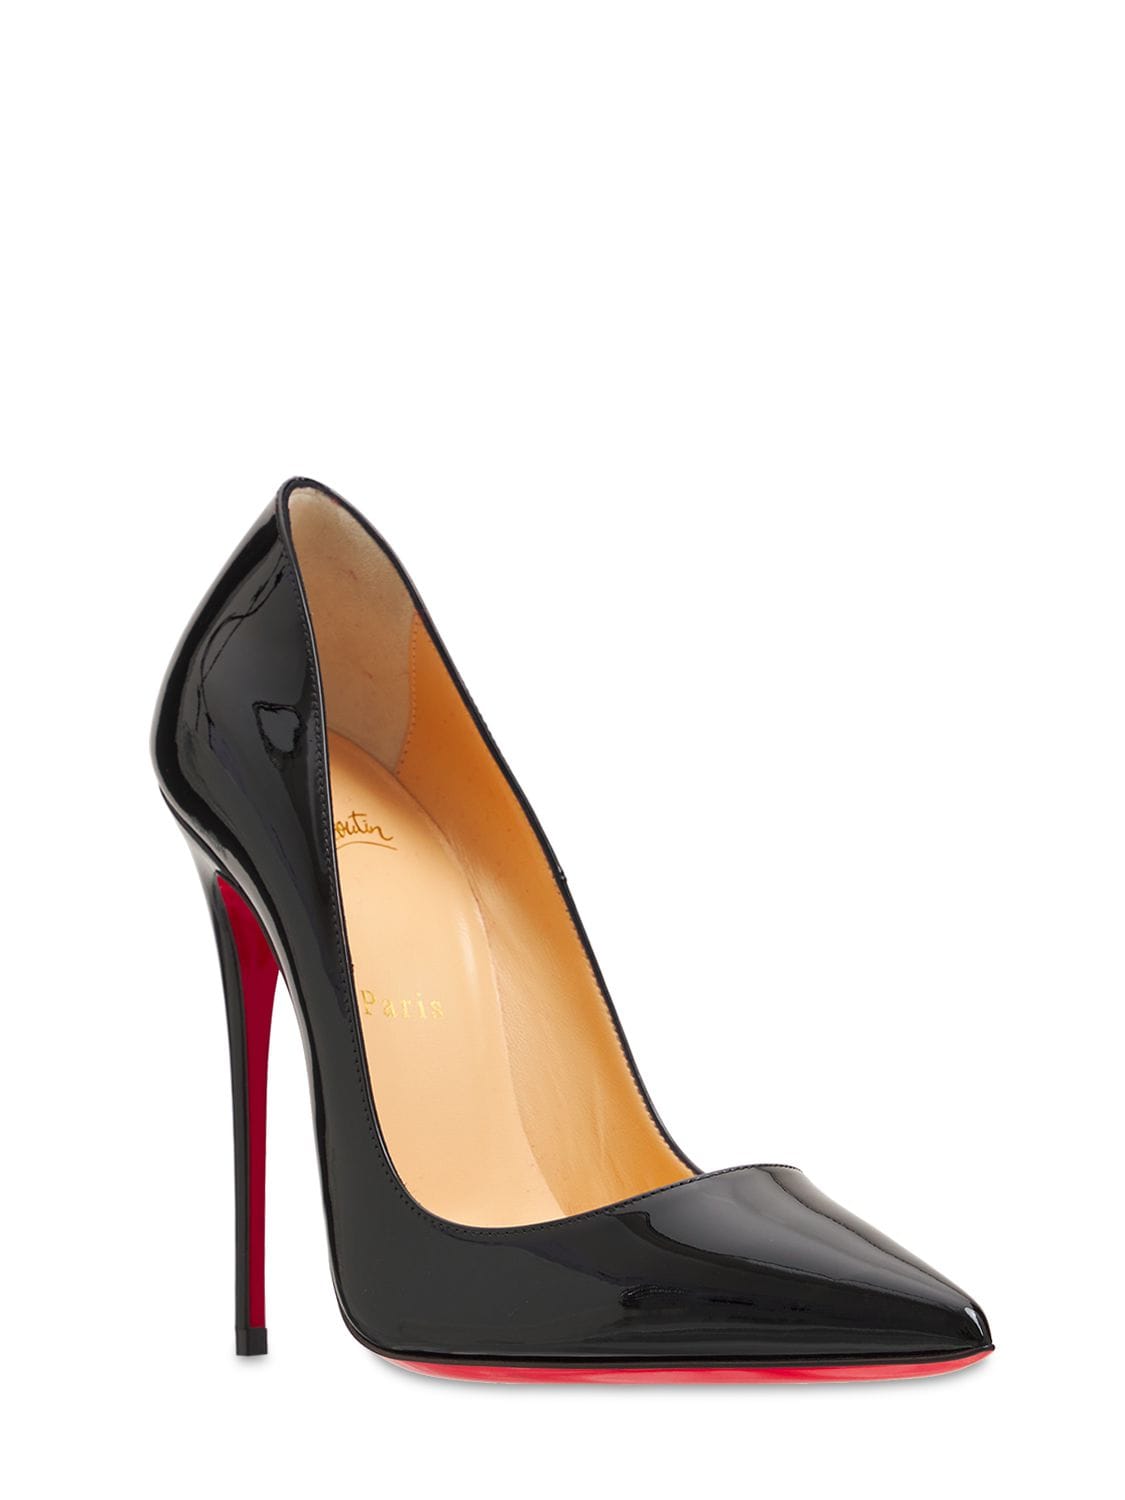 Shop Christian Louboutin 120mm So Kate Patent Leather Pumps In Black